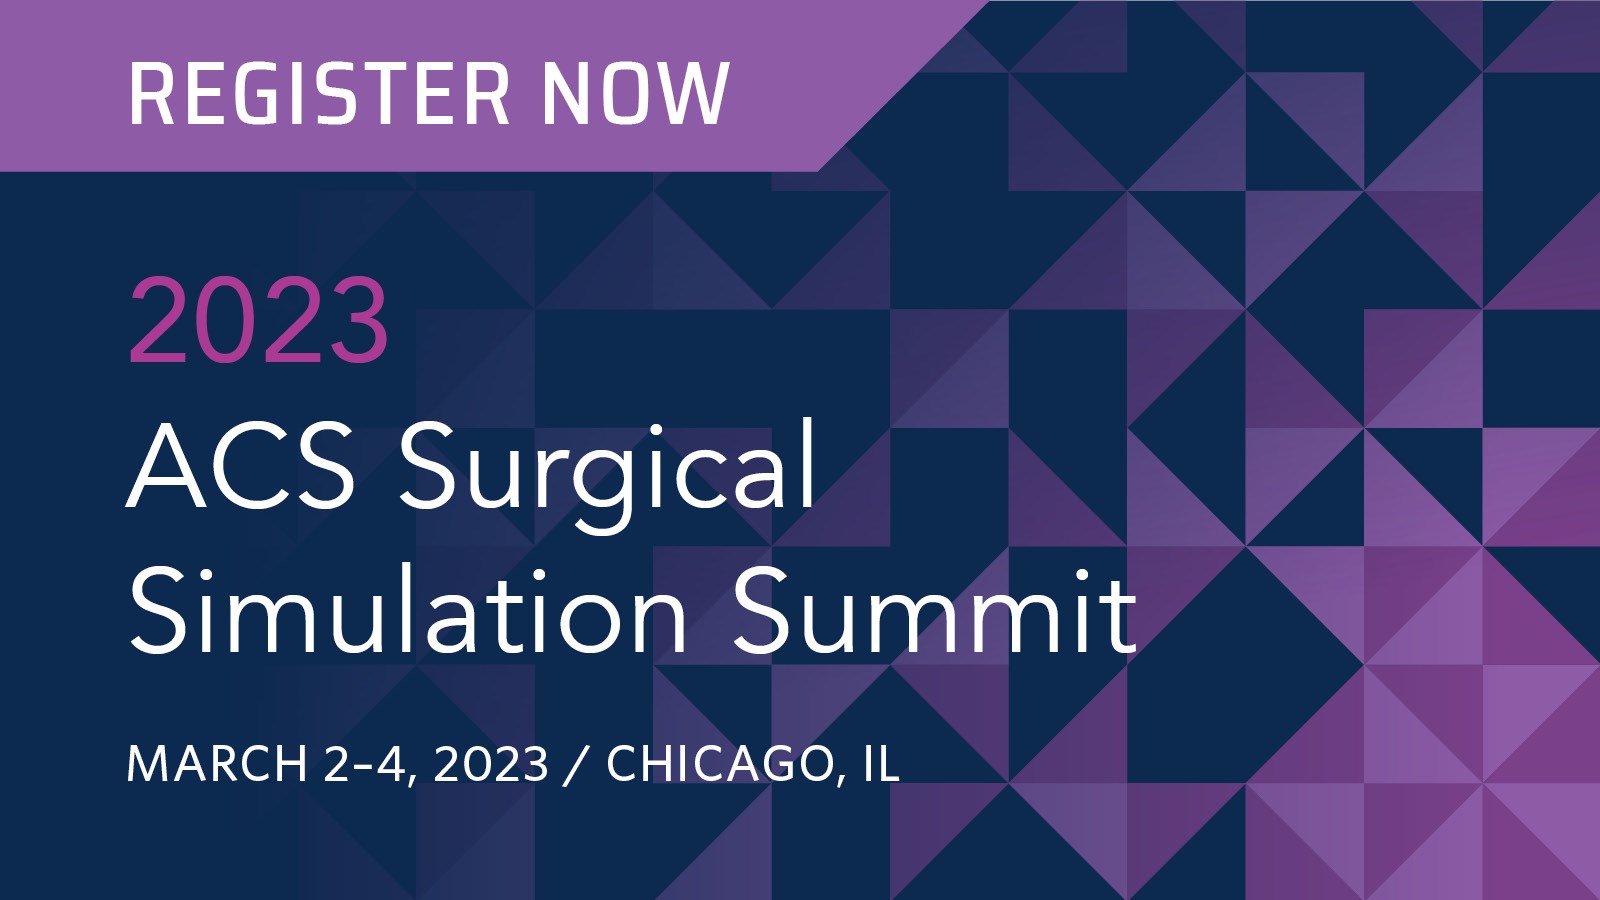 Register Today for ACS Surgical Simulation Summit ACS